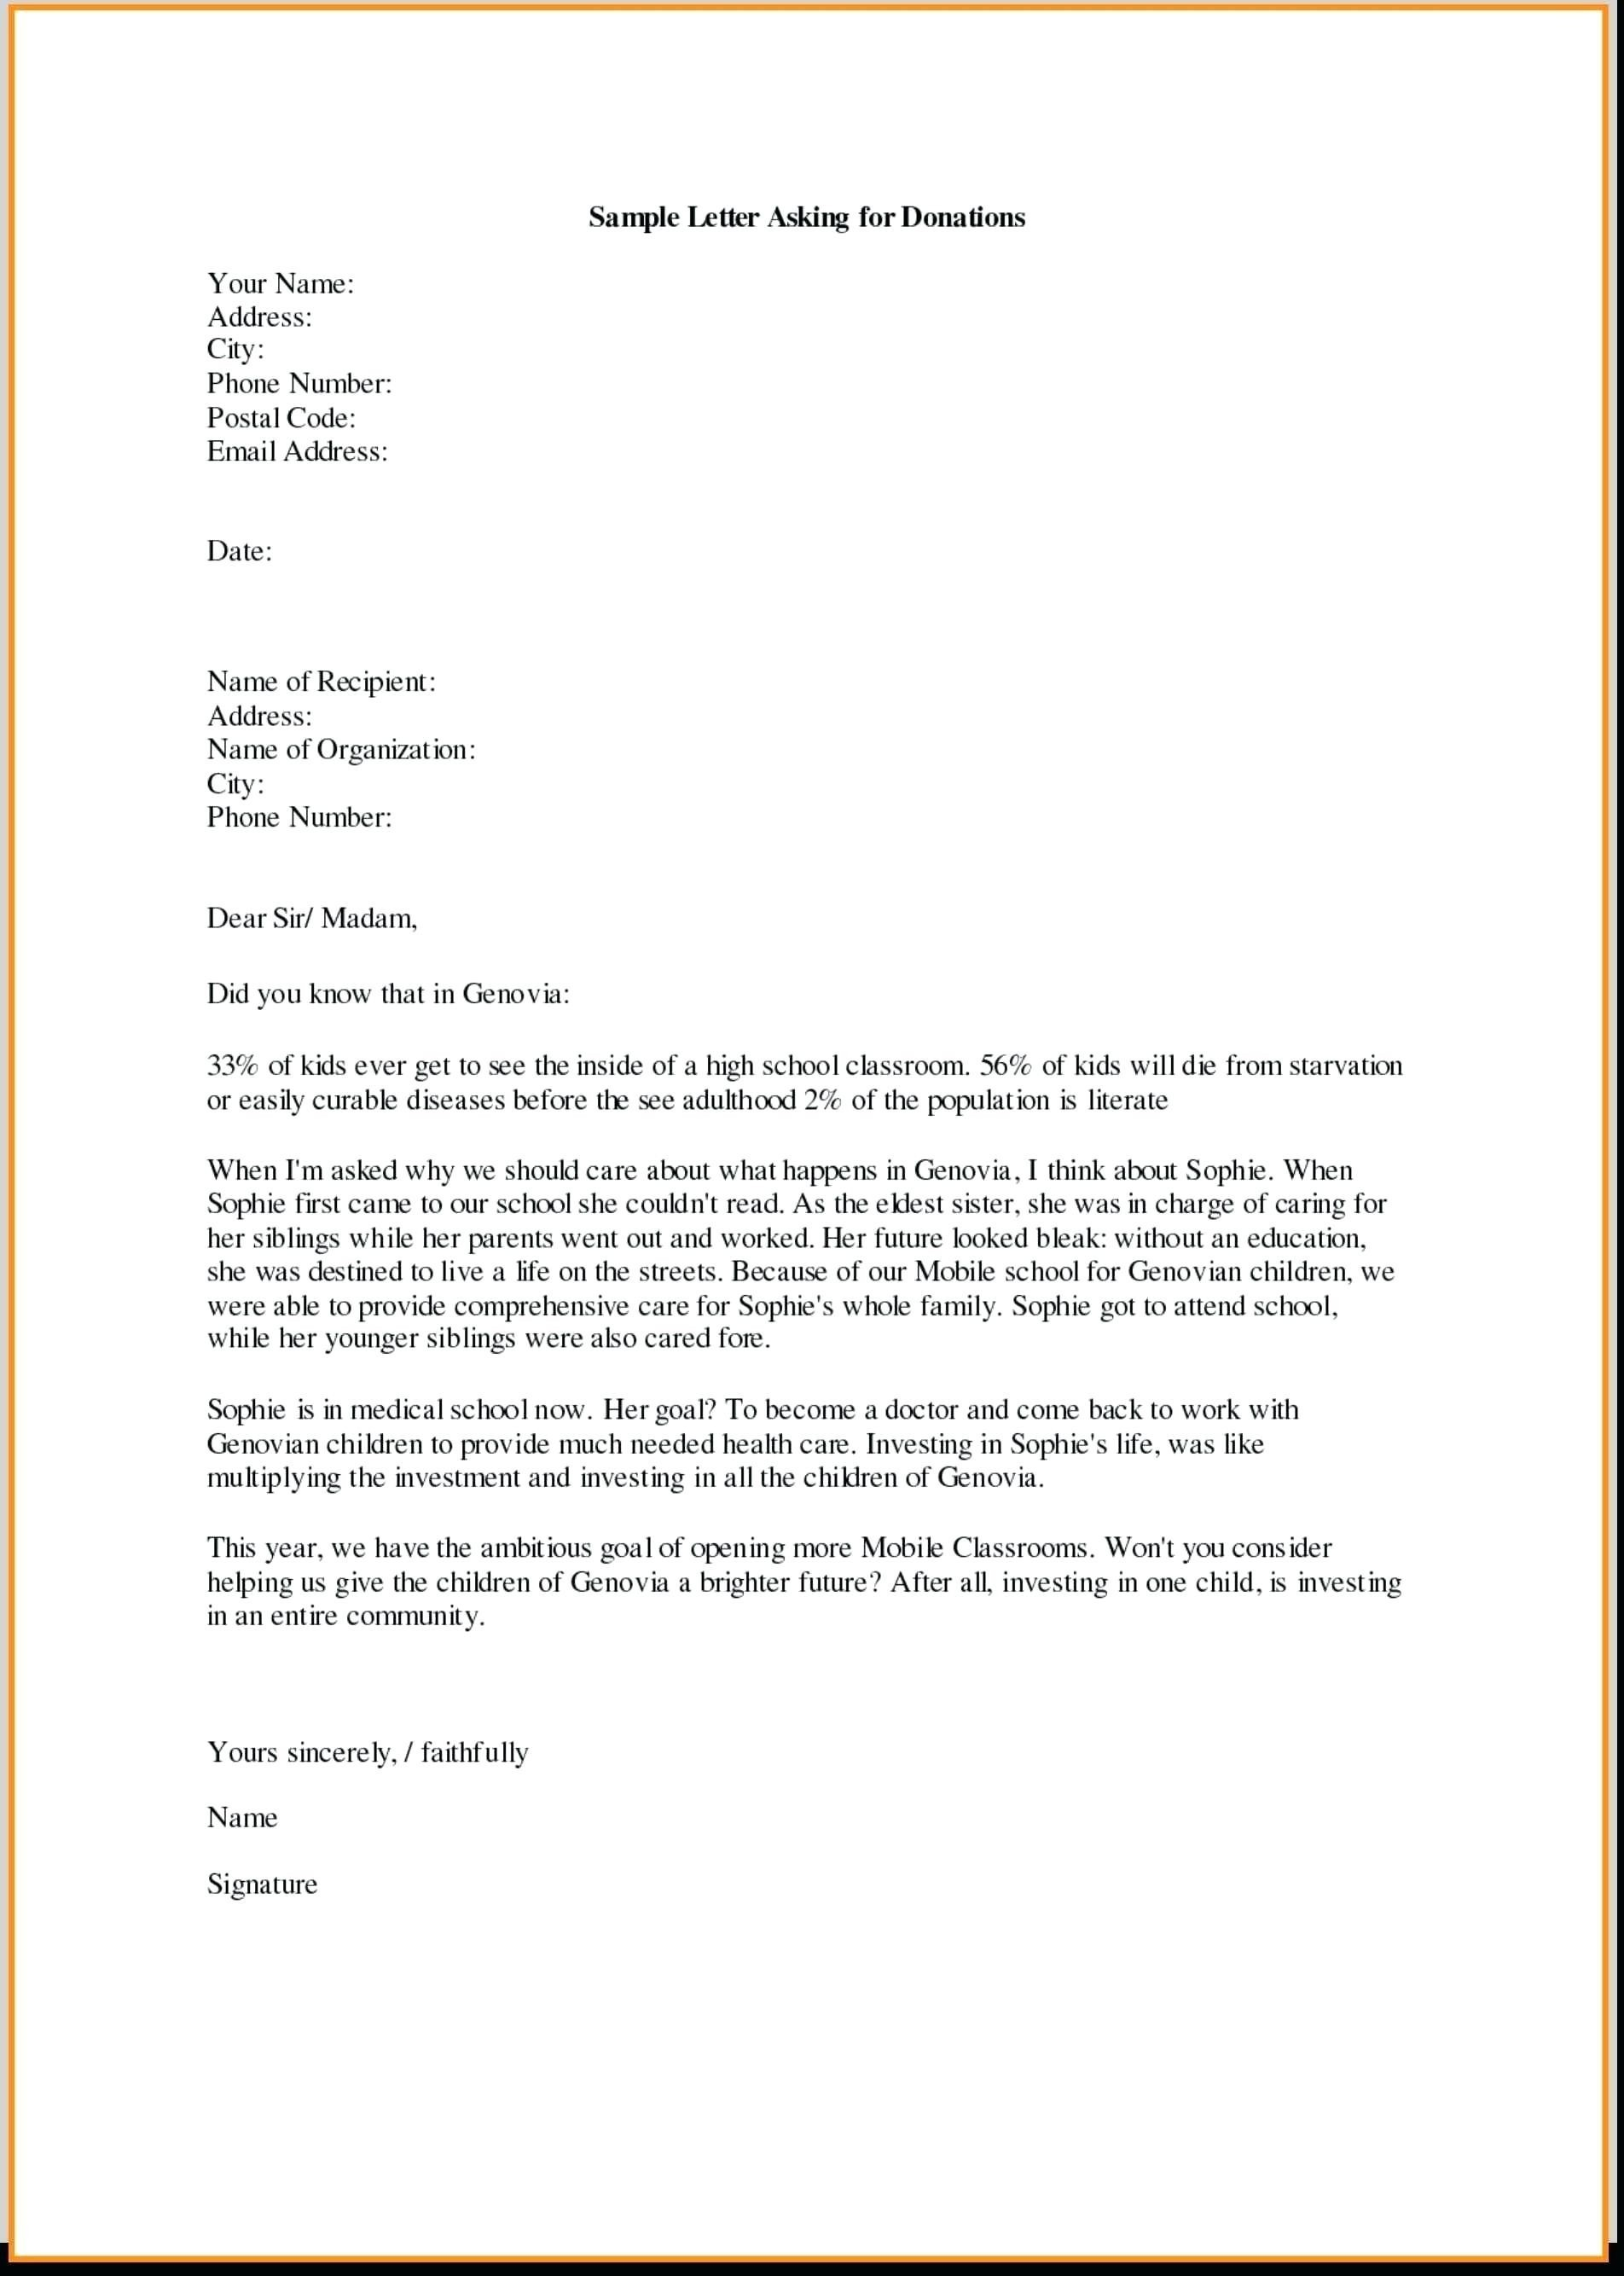 Fundraising Request for Donation Letter Template - Samples Letters Request Donation Best Samples Letters Request